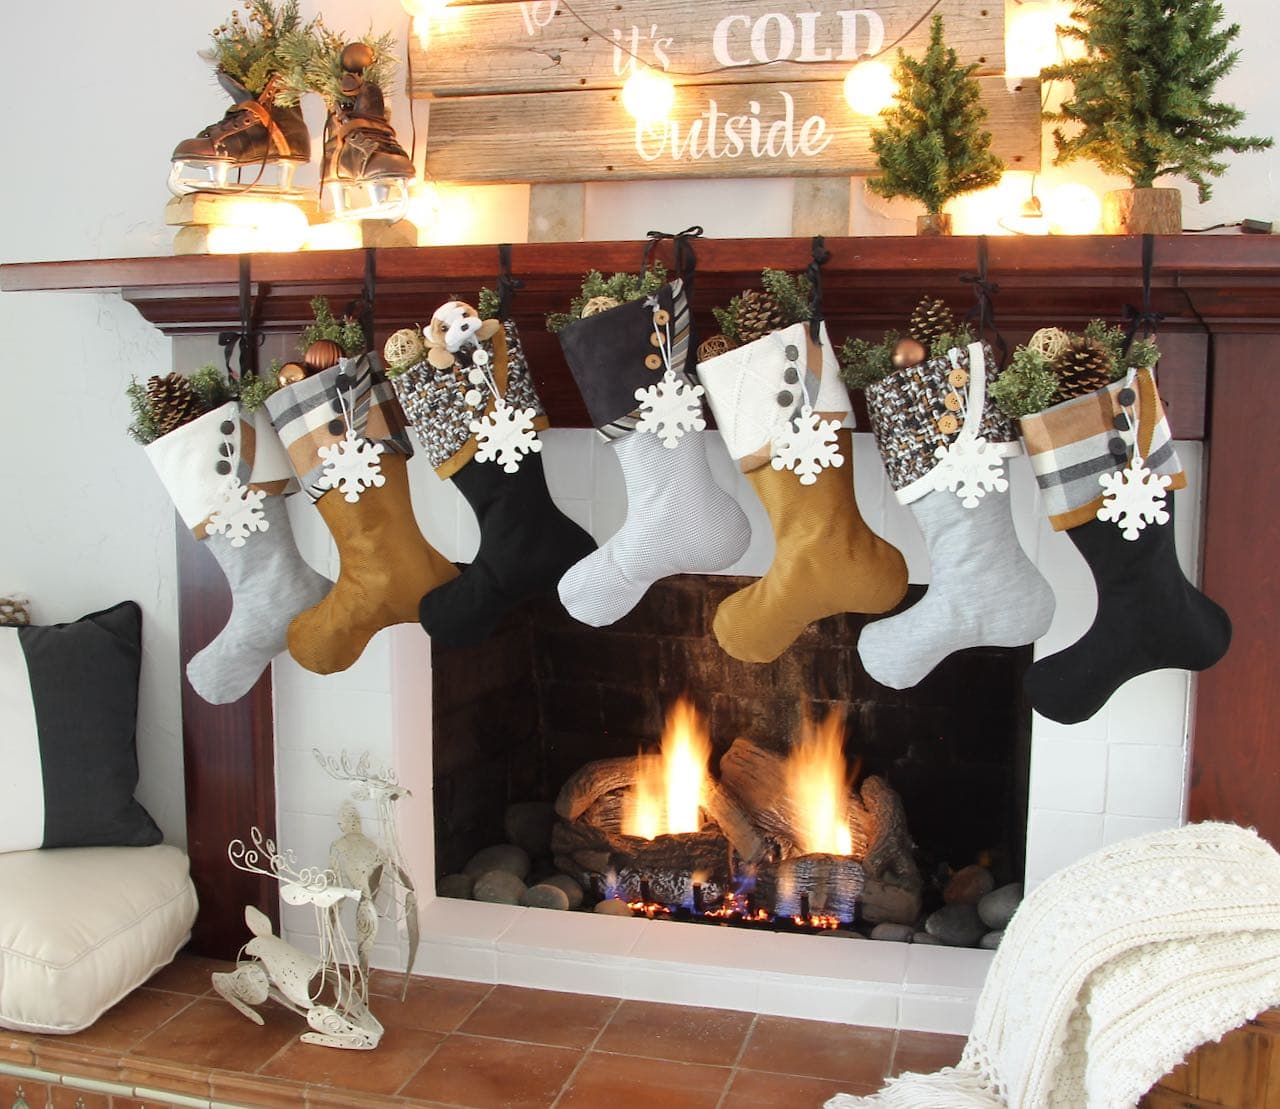 Cozy Copper Christmas Stockings with snowflake name tags hanging on a mantel with a fire roaring below and